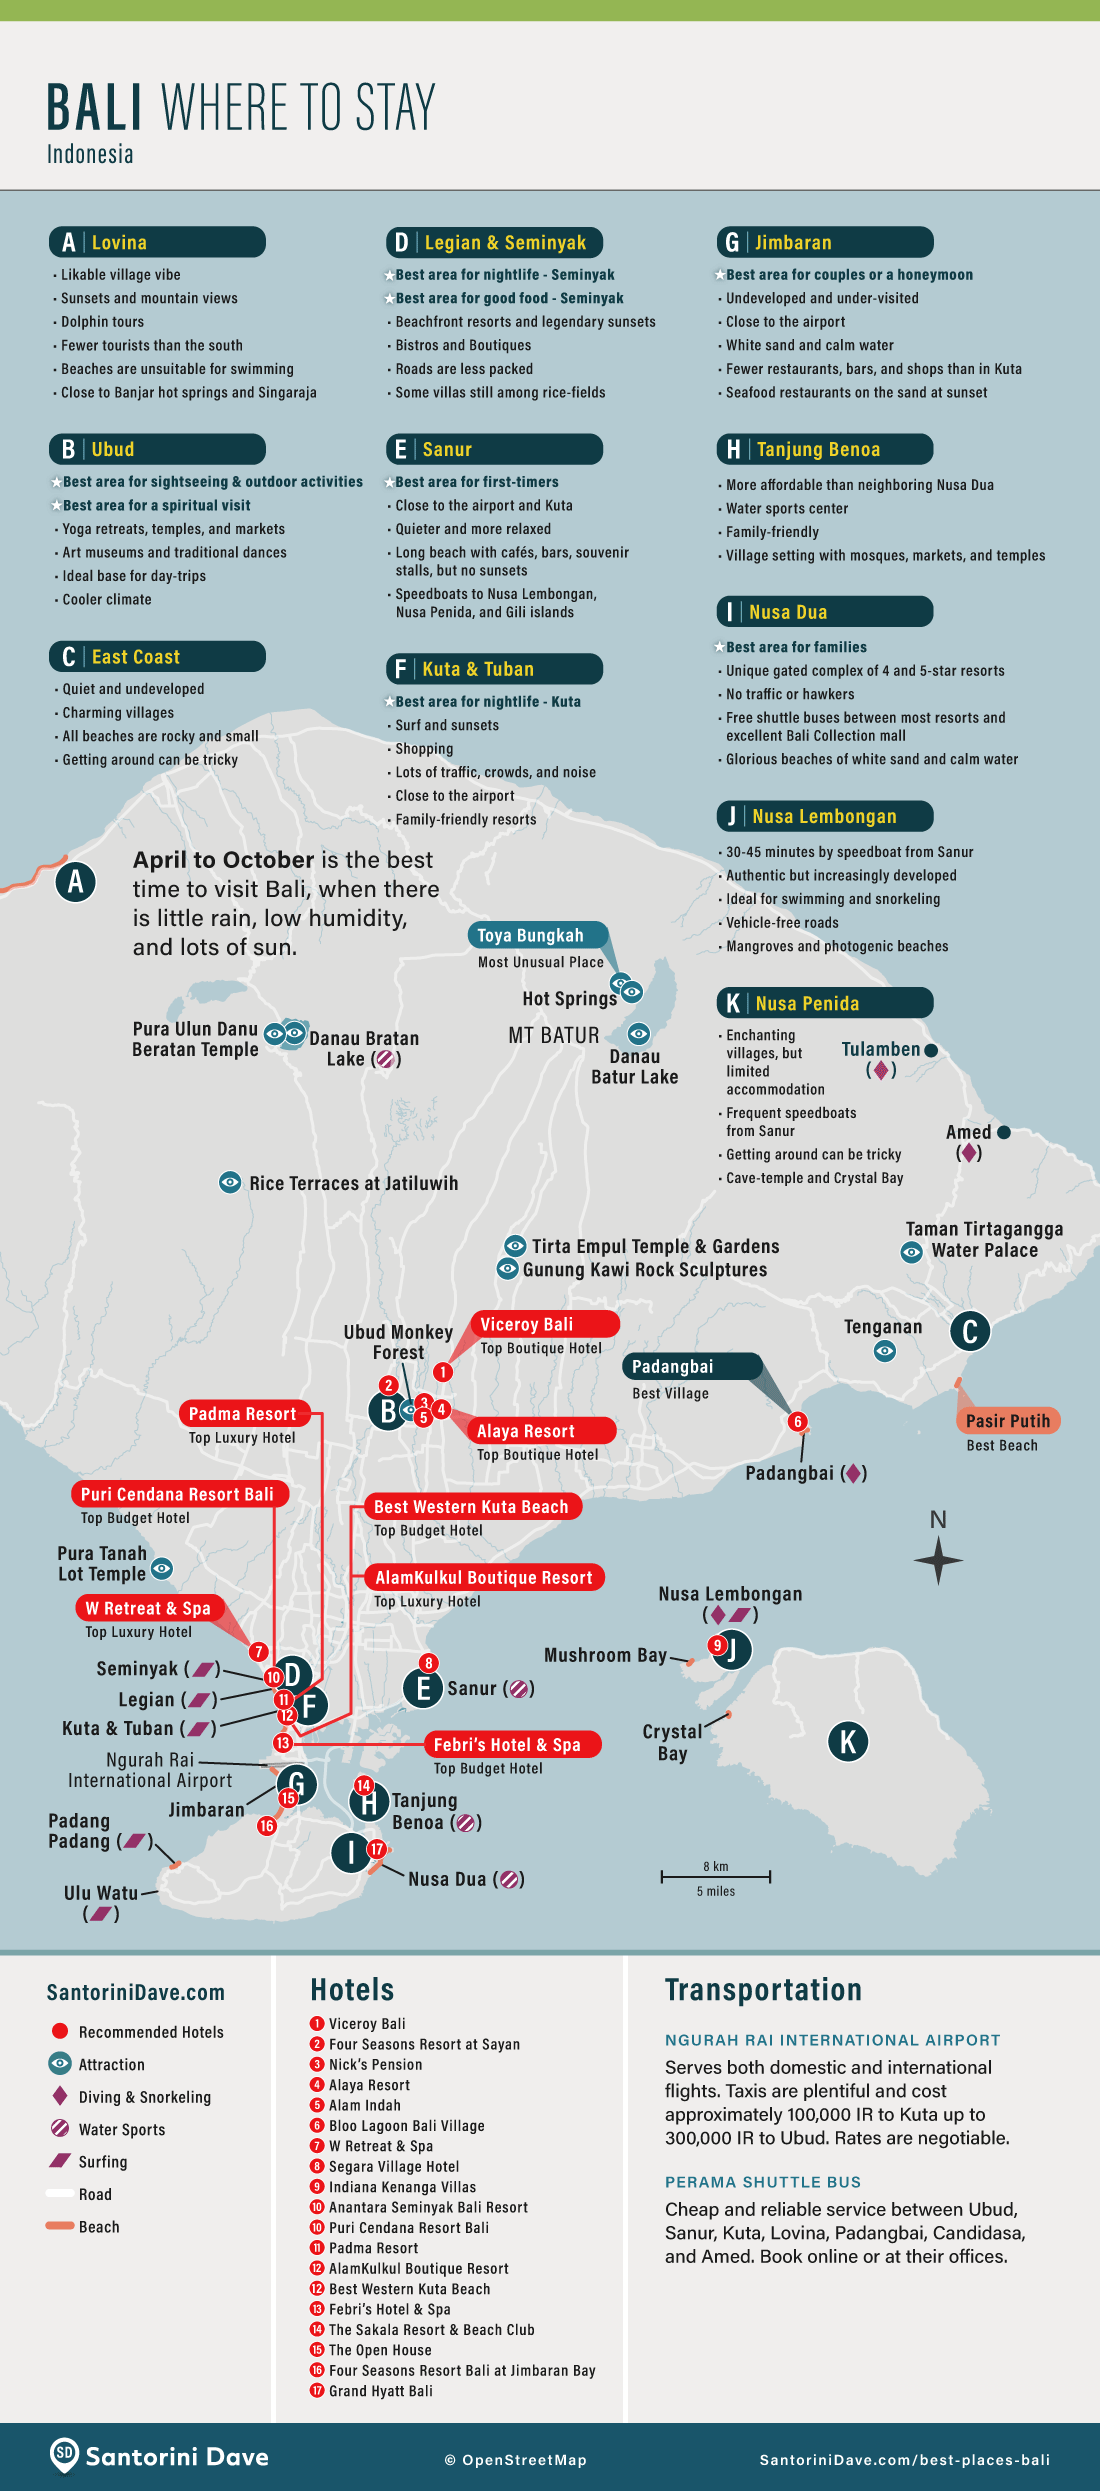 Map showing the best areas for travelers to stay in Bali, Indonesia.